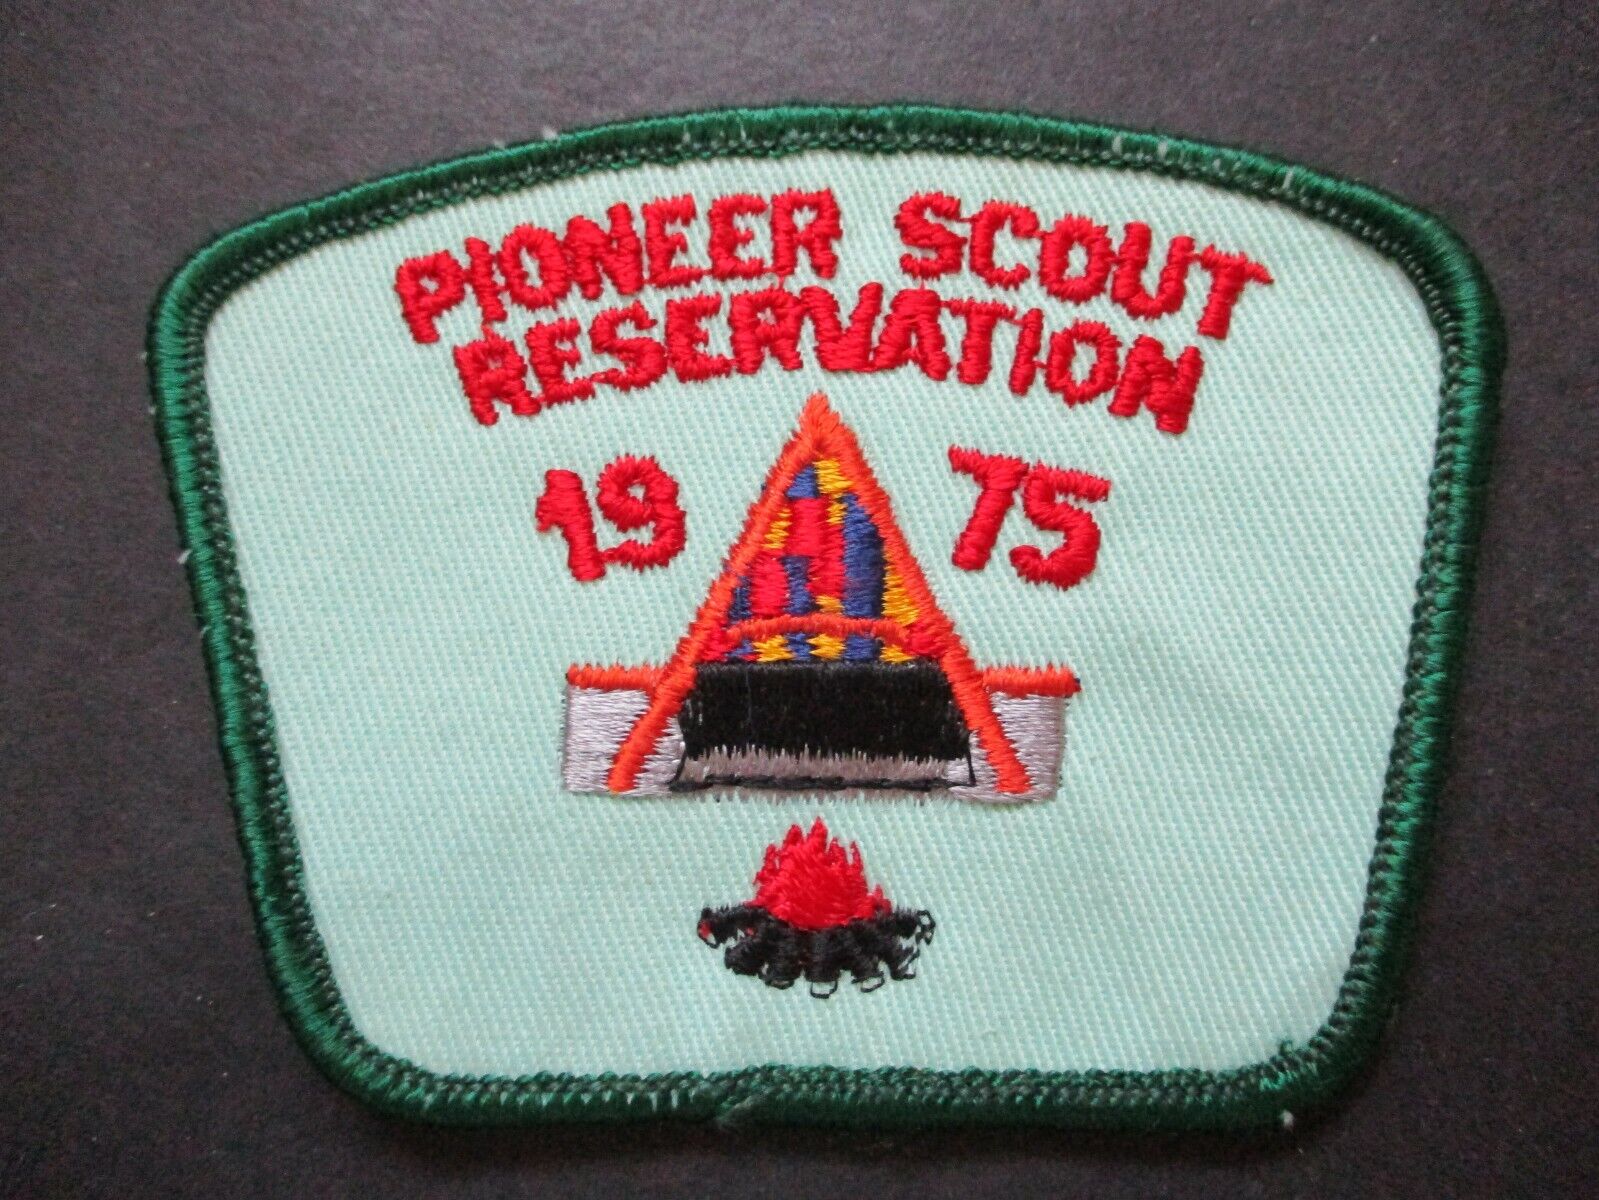 1975 Pioneer Scout Reservation dark green border boy scout patch